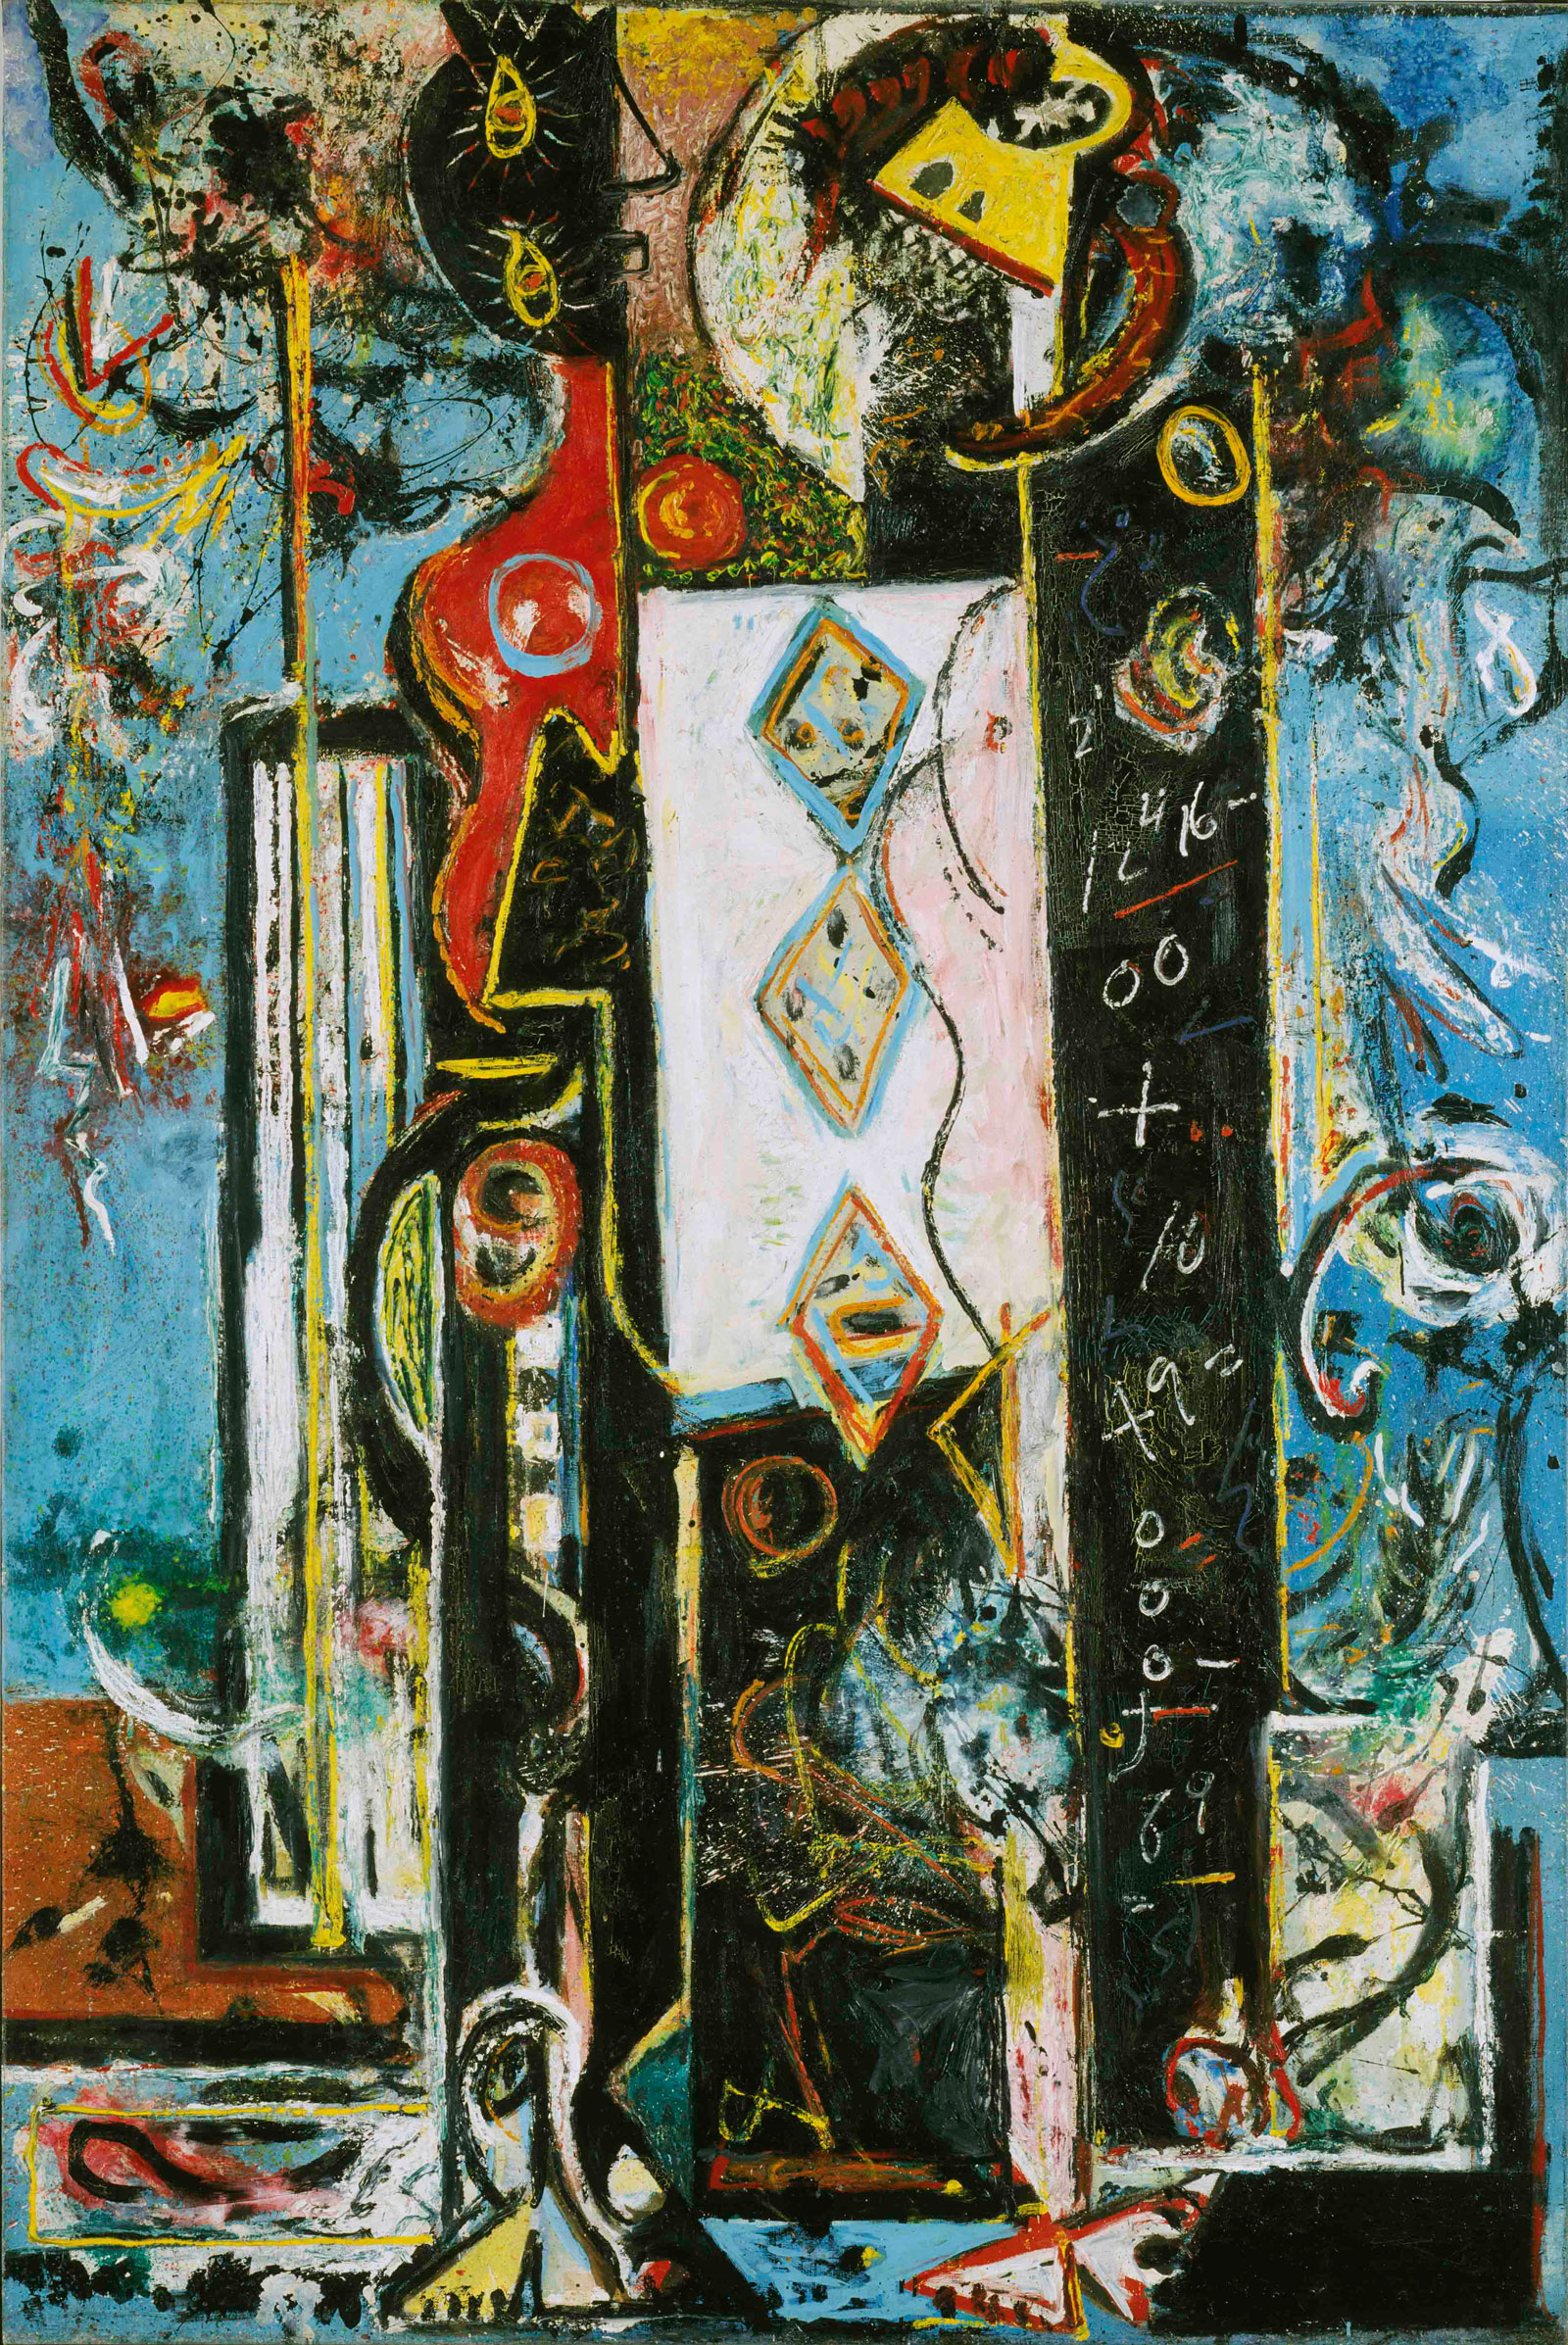 Jackson Pollock: Male and Female, 1942-43; click image to enlarge